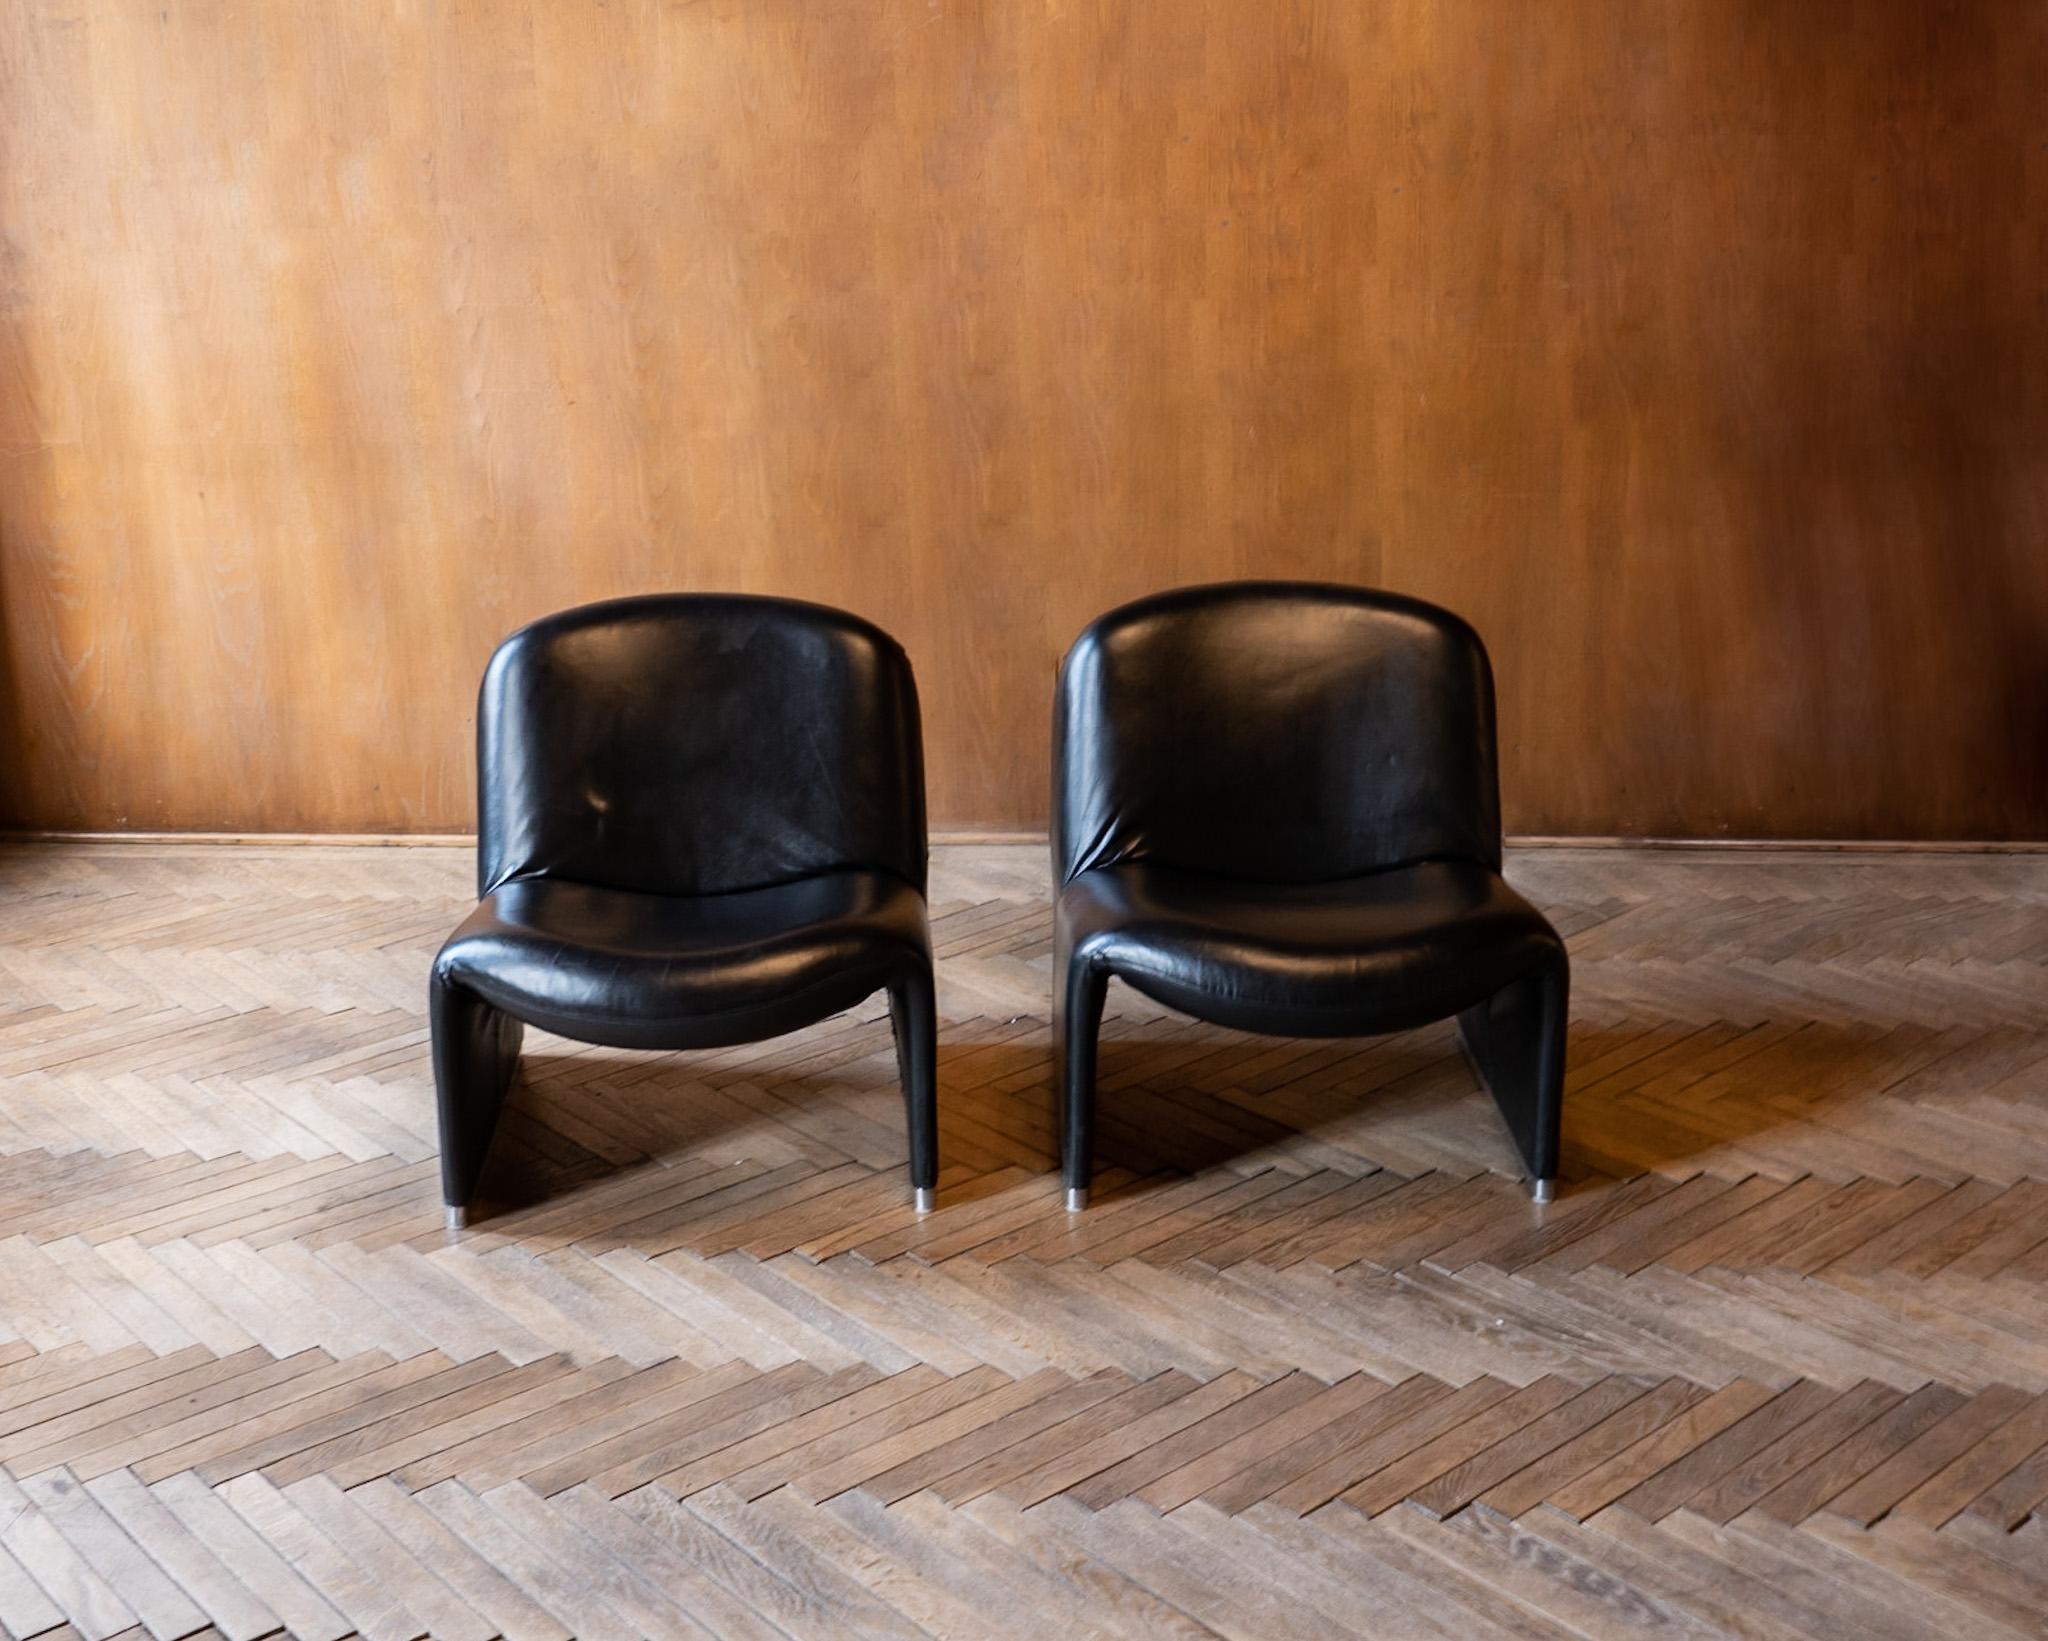 Italian Mid-Century Modern Black Leather Alky Chairs 2 by Giancarlo Piretti, Italy 1970s